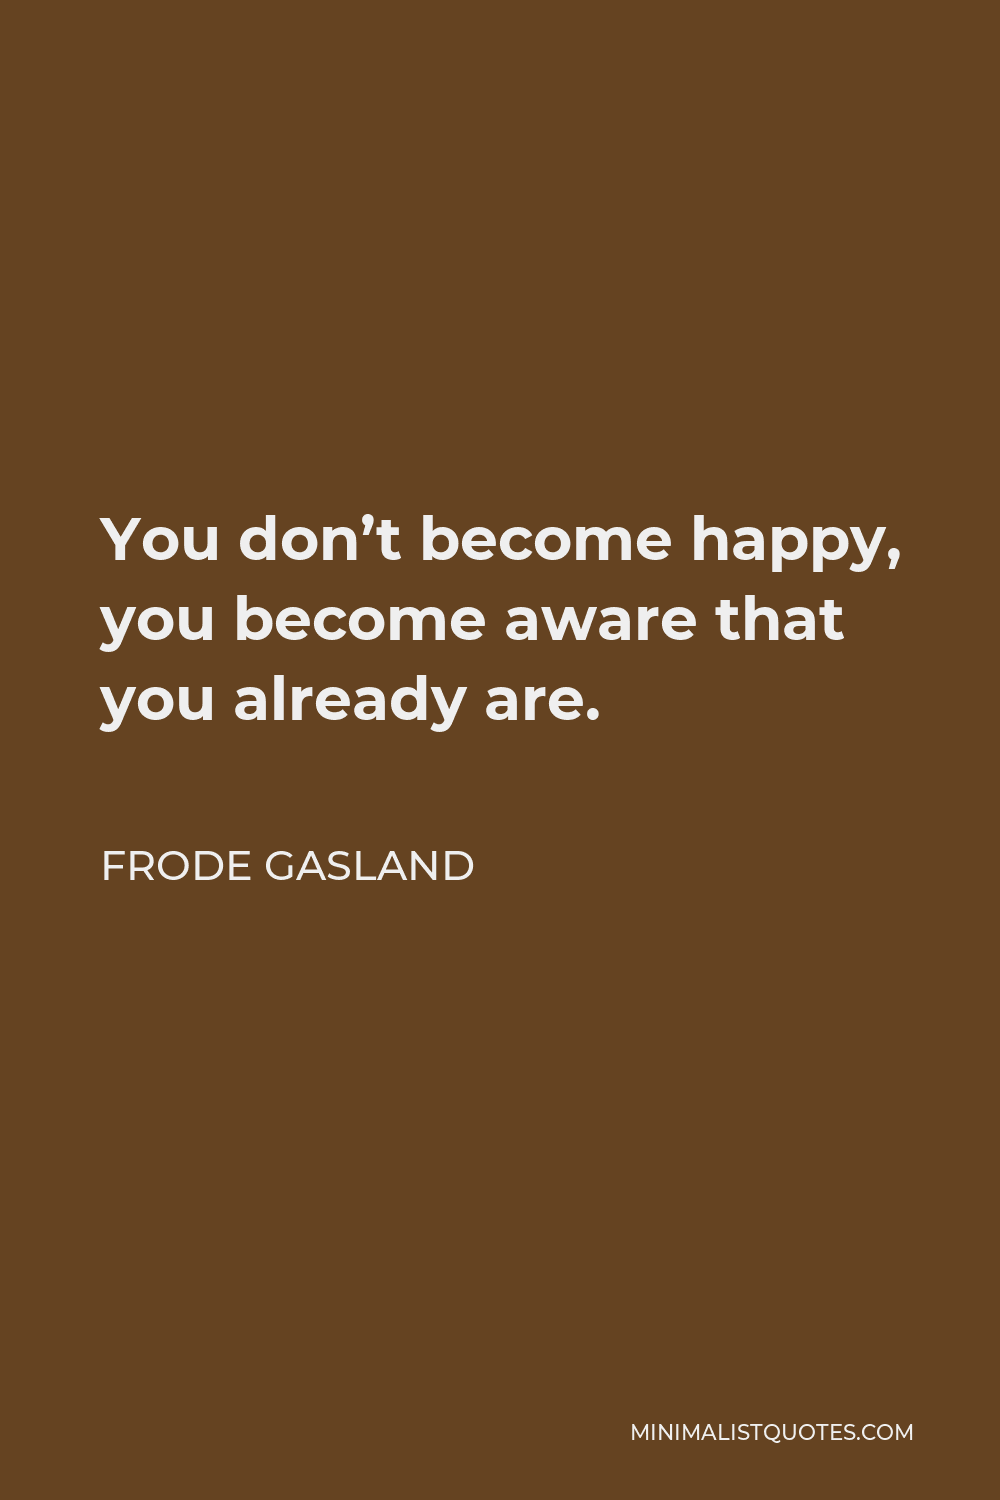 Frode Gasland Quote - You don’t become happy, you become aware that you already are.